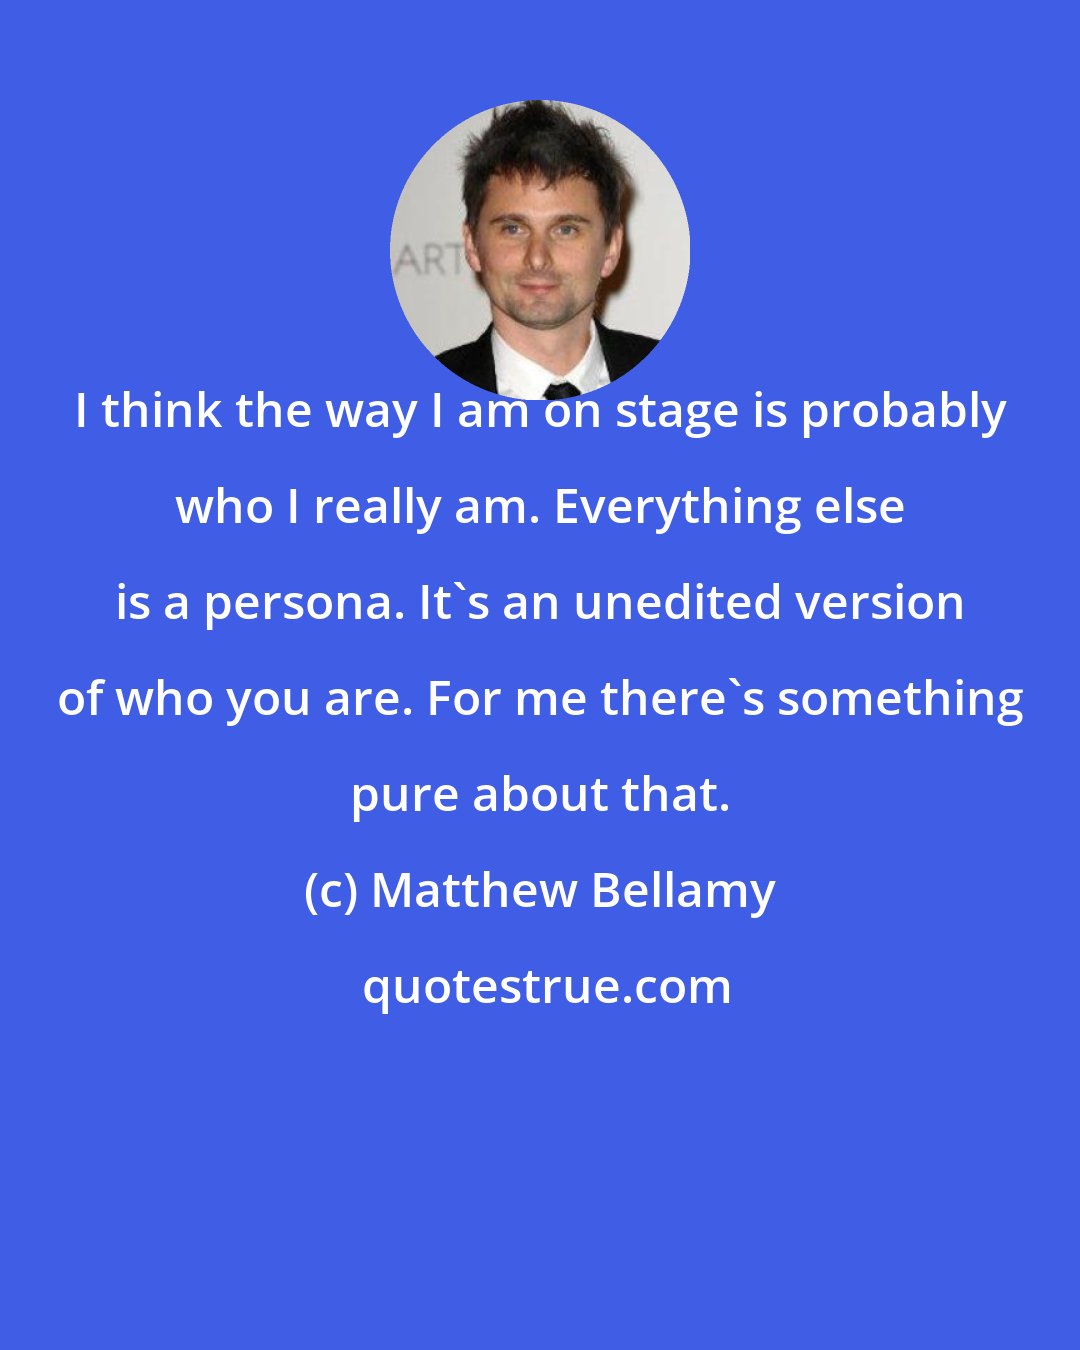 Matthew Bellamy: I think the way I am on stage is probably who I really am. Everything else is a persona. It's an unedited version of who you are. For me there's something pure about that.